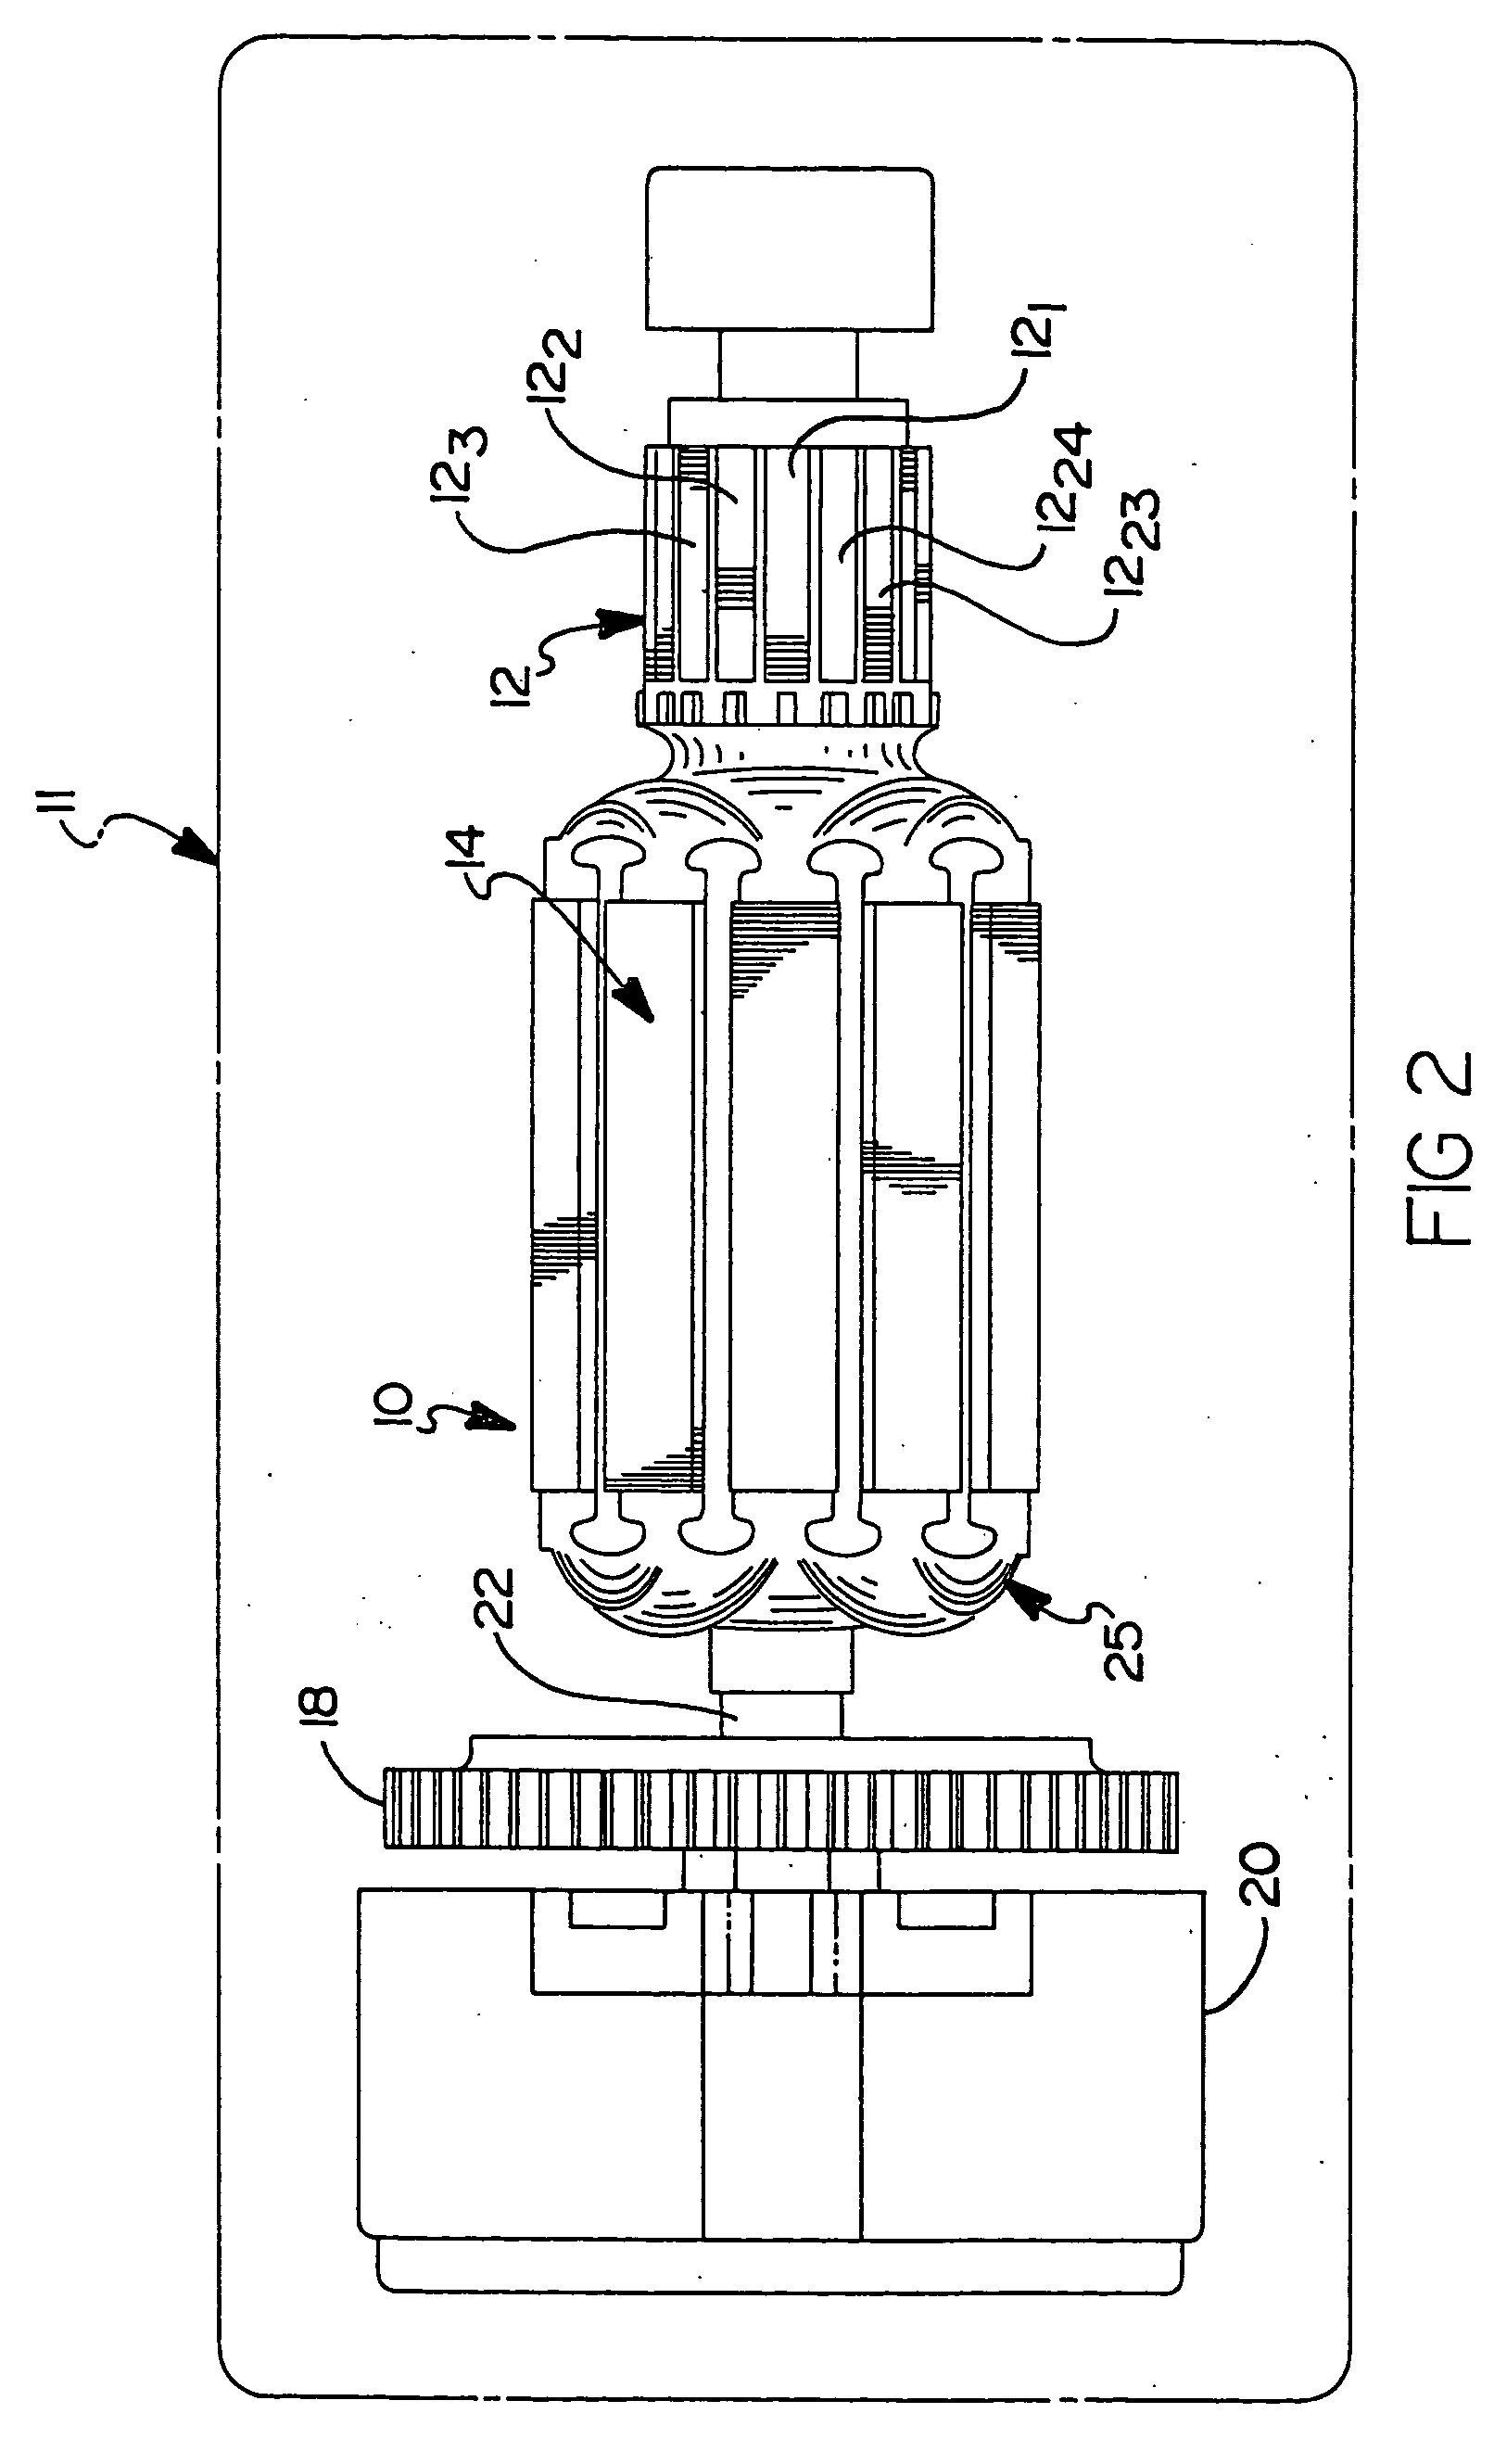 Method for manufacturing an armature of an electric motor